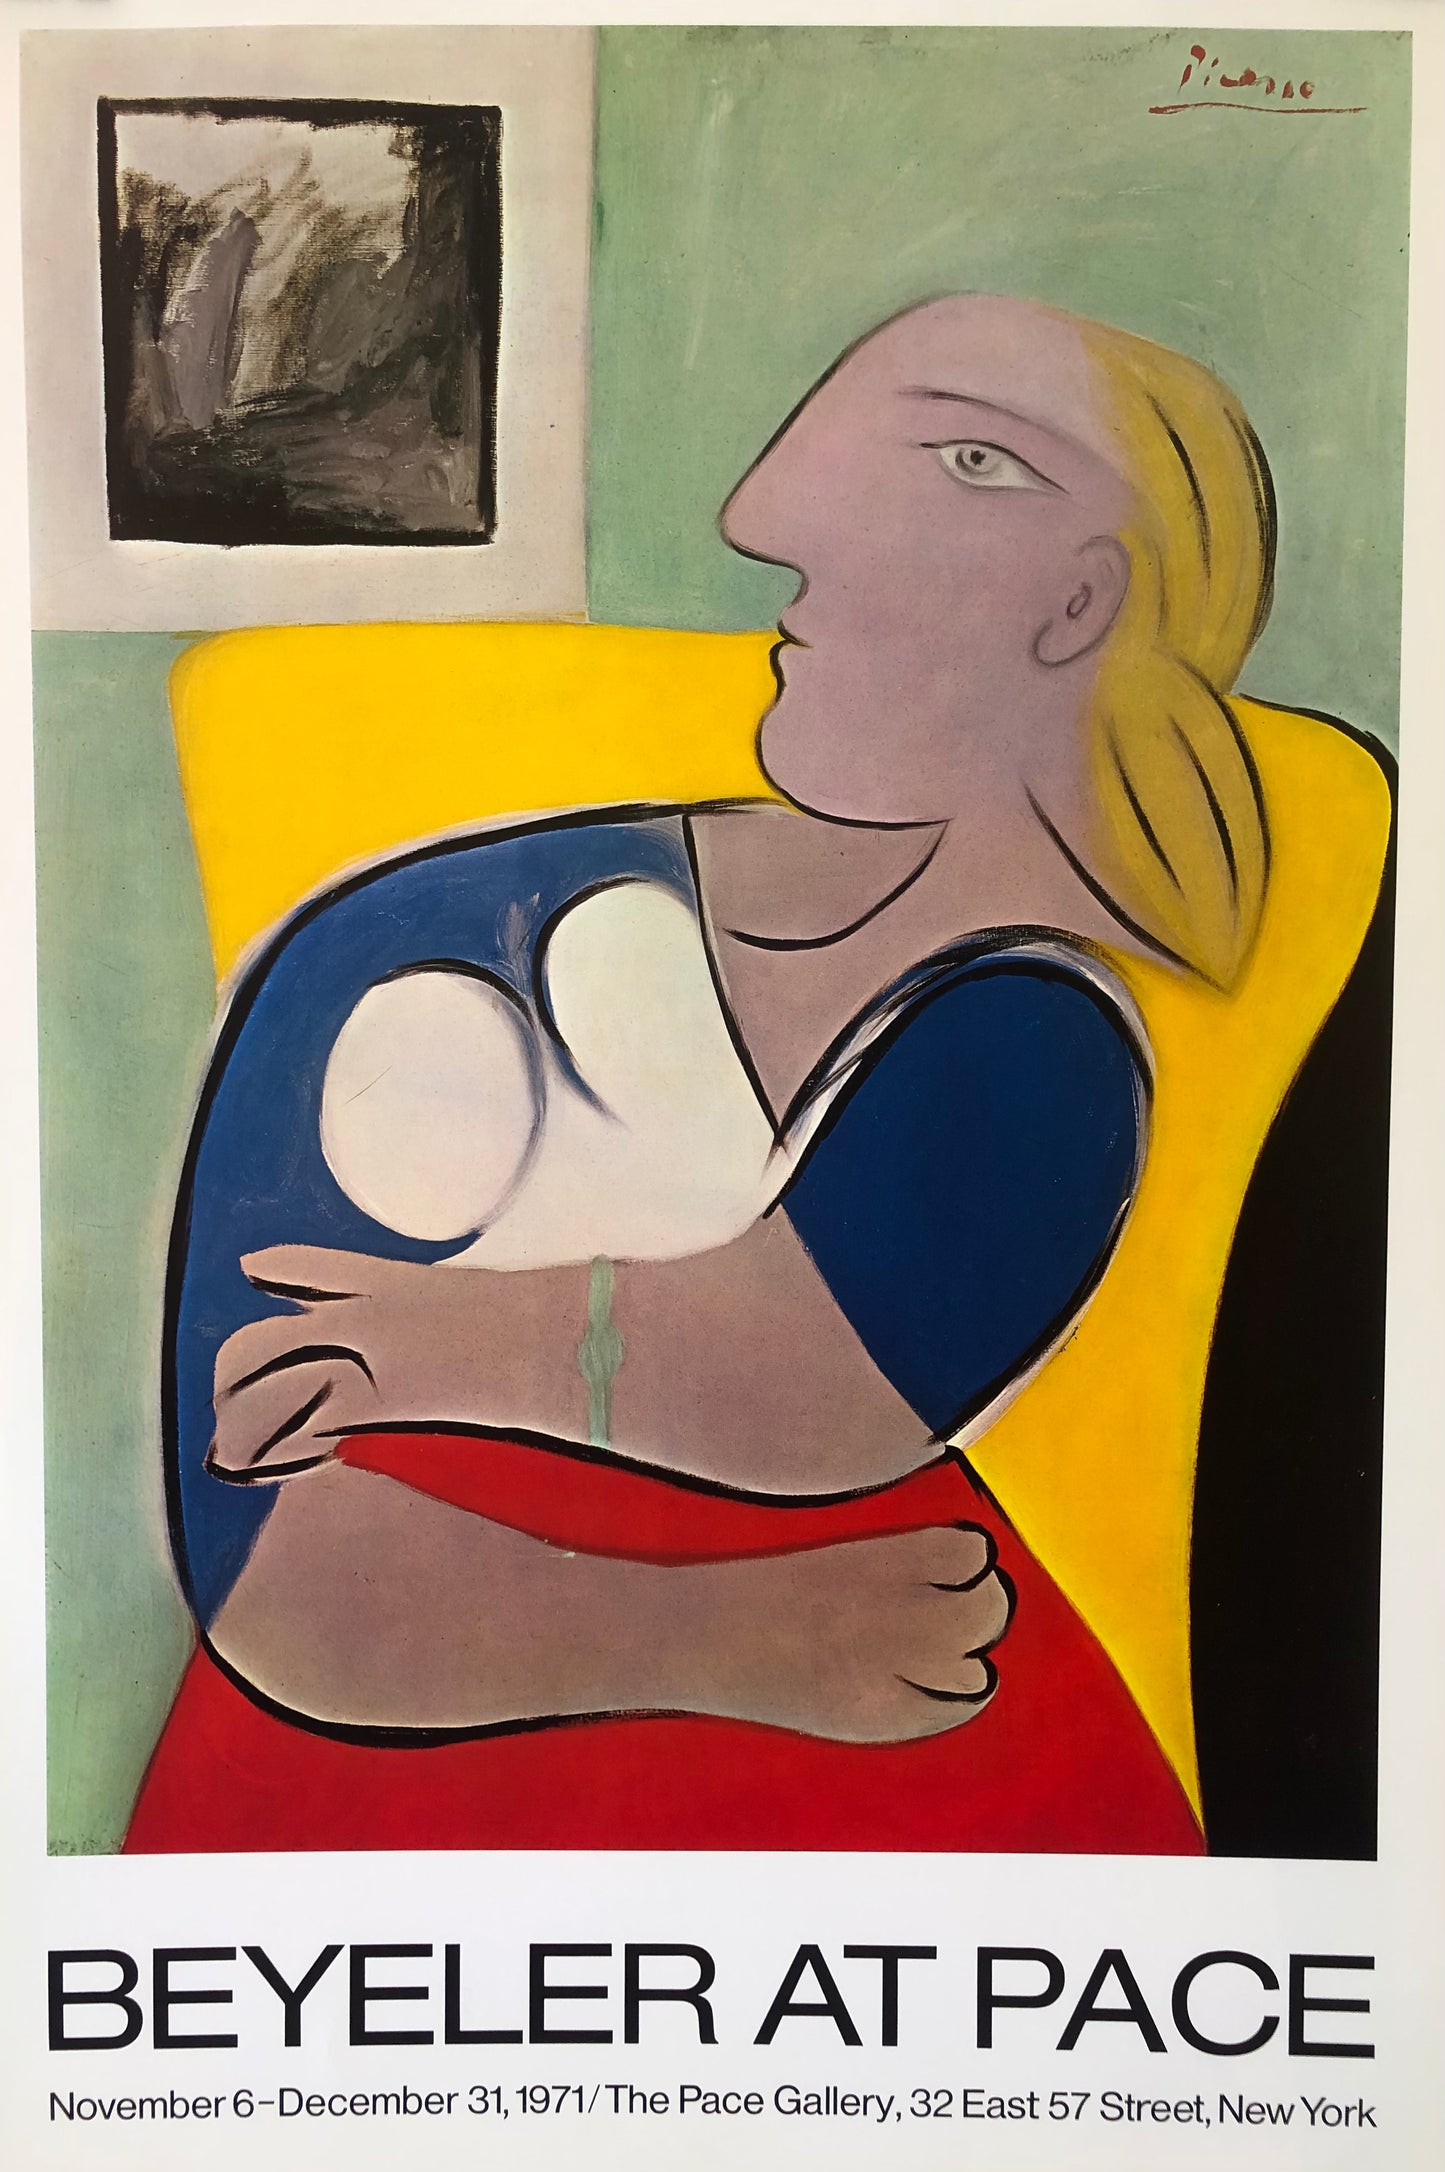 Picasso, 'Beyeler at Pace', The Pace Gallery Exhibition Poster 1971